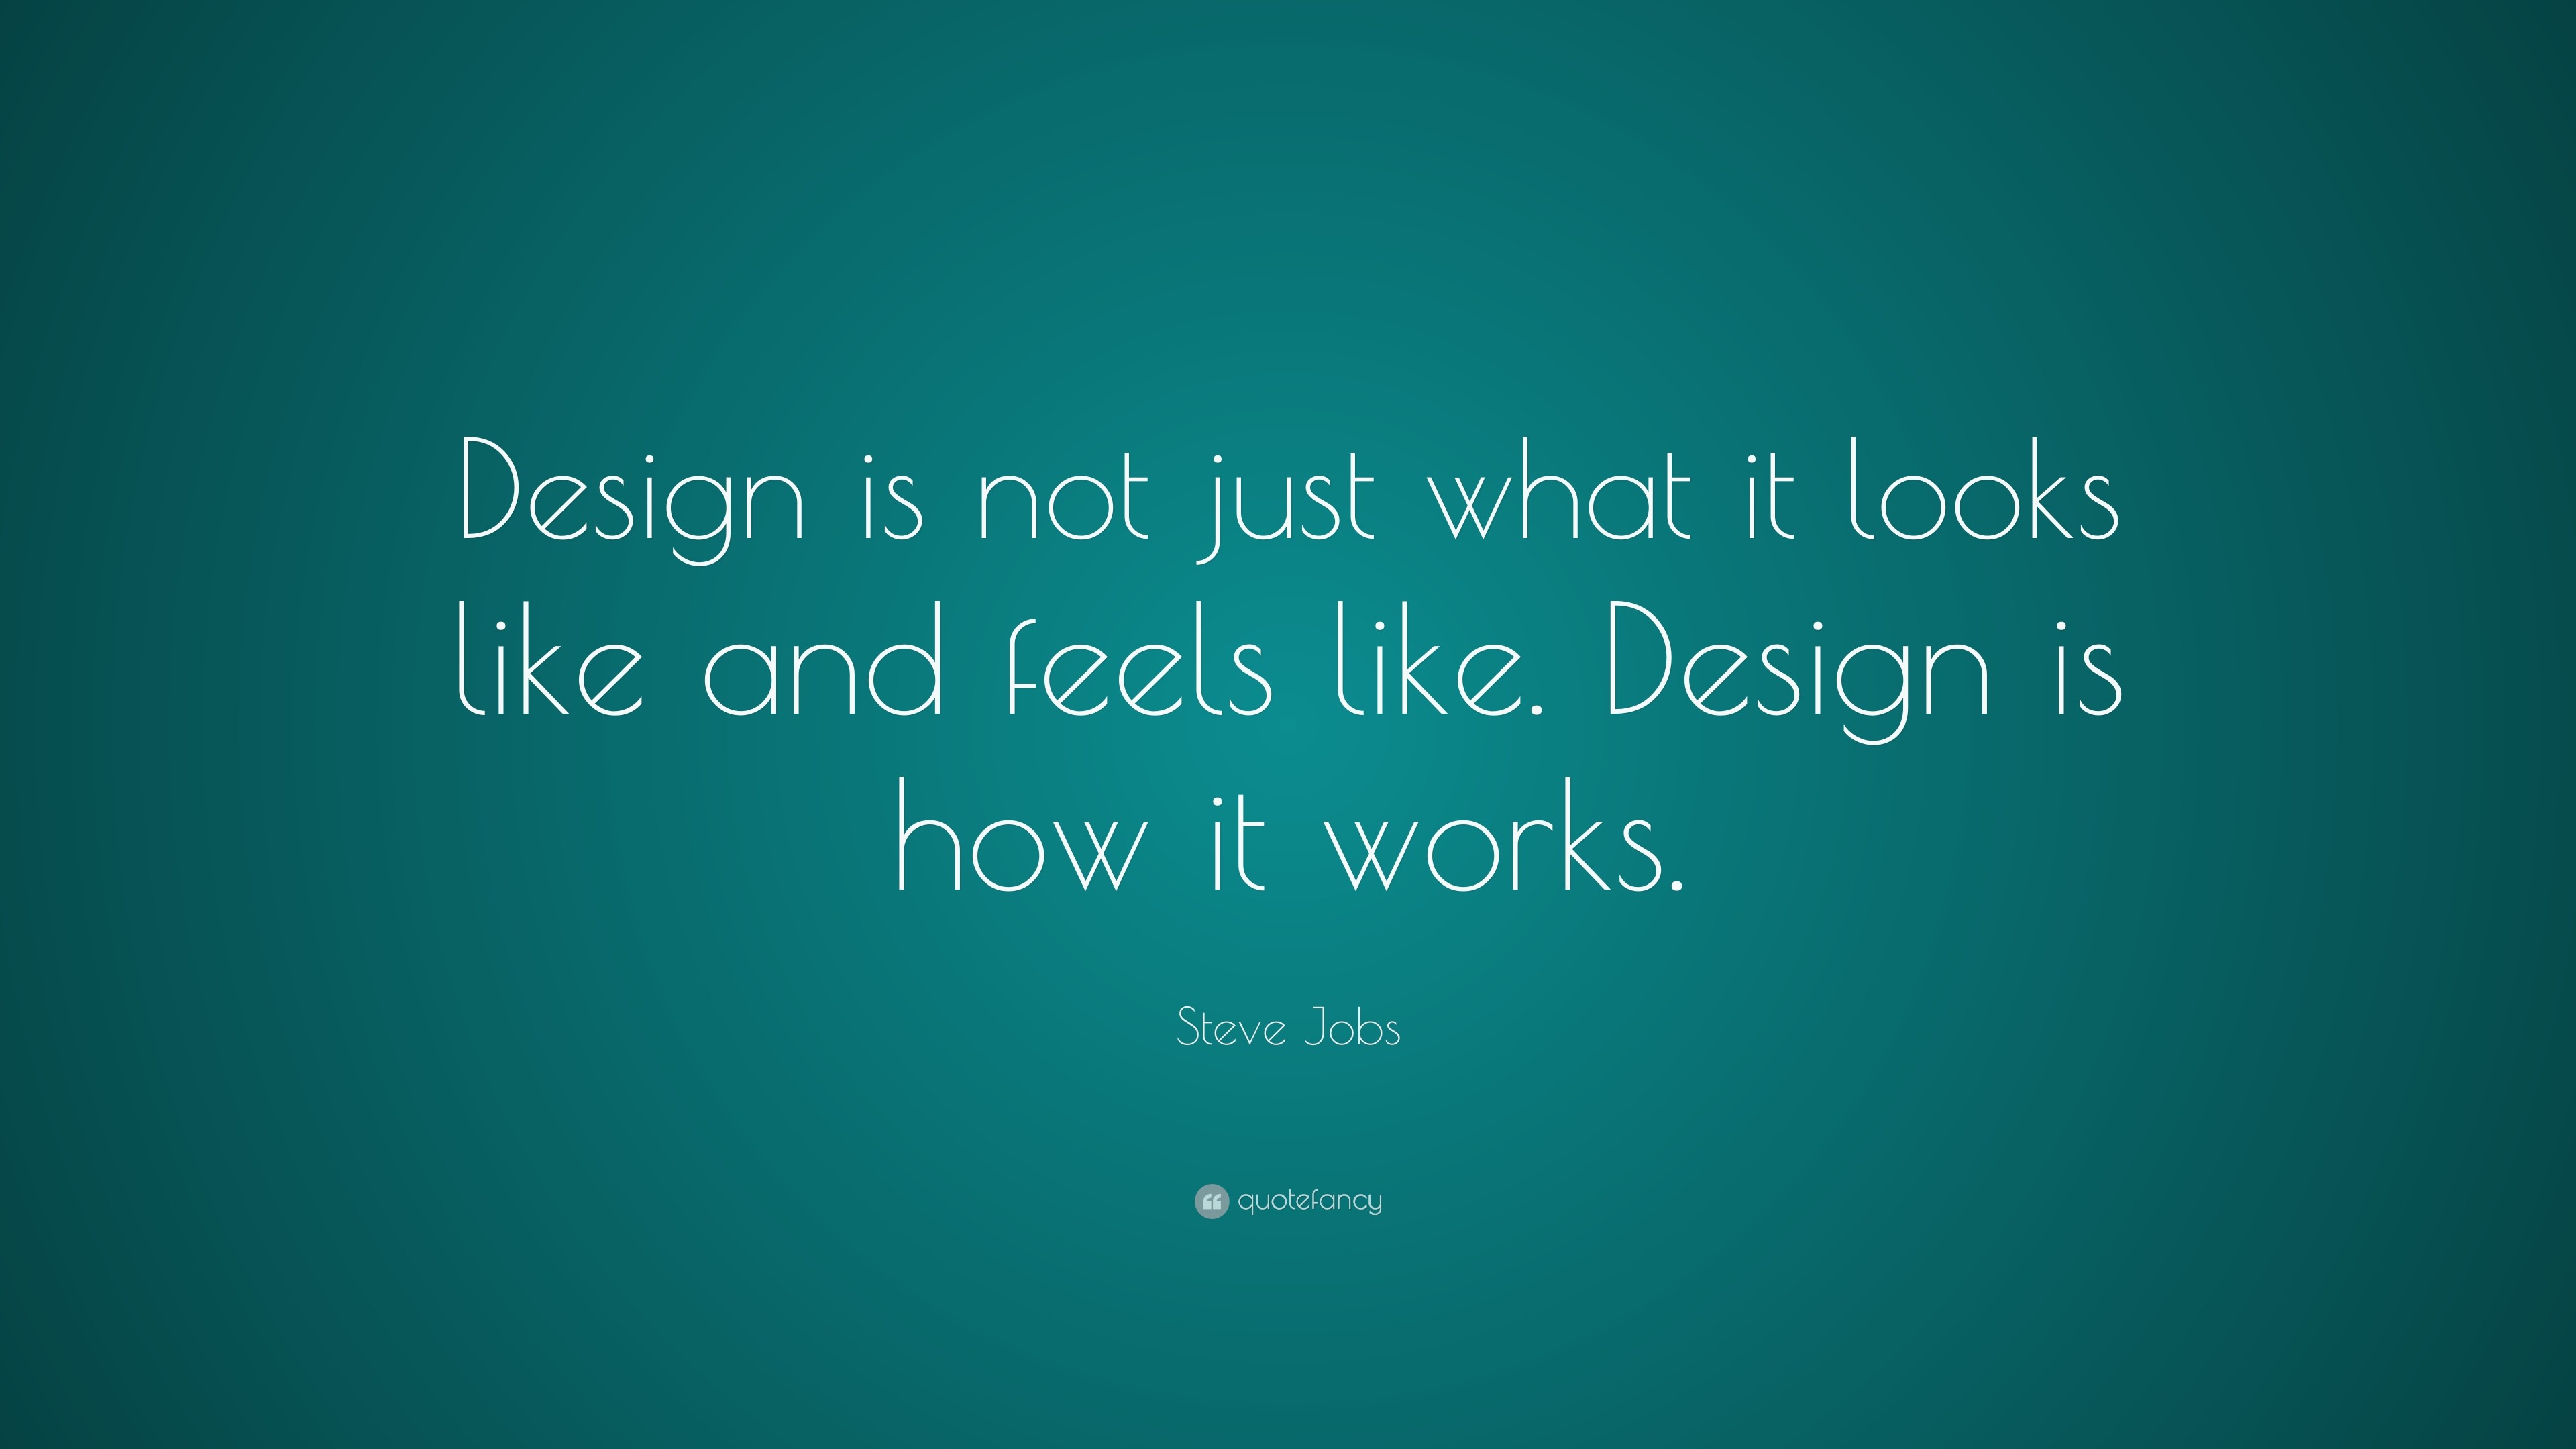 3840x2160 Steve Jobs Quote: “Design is not just what it looks like and feels like